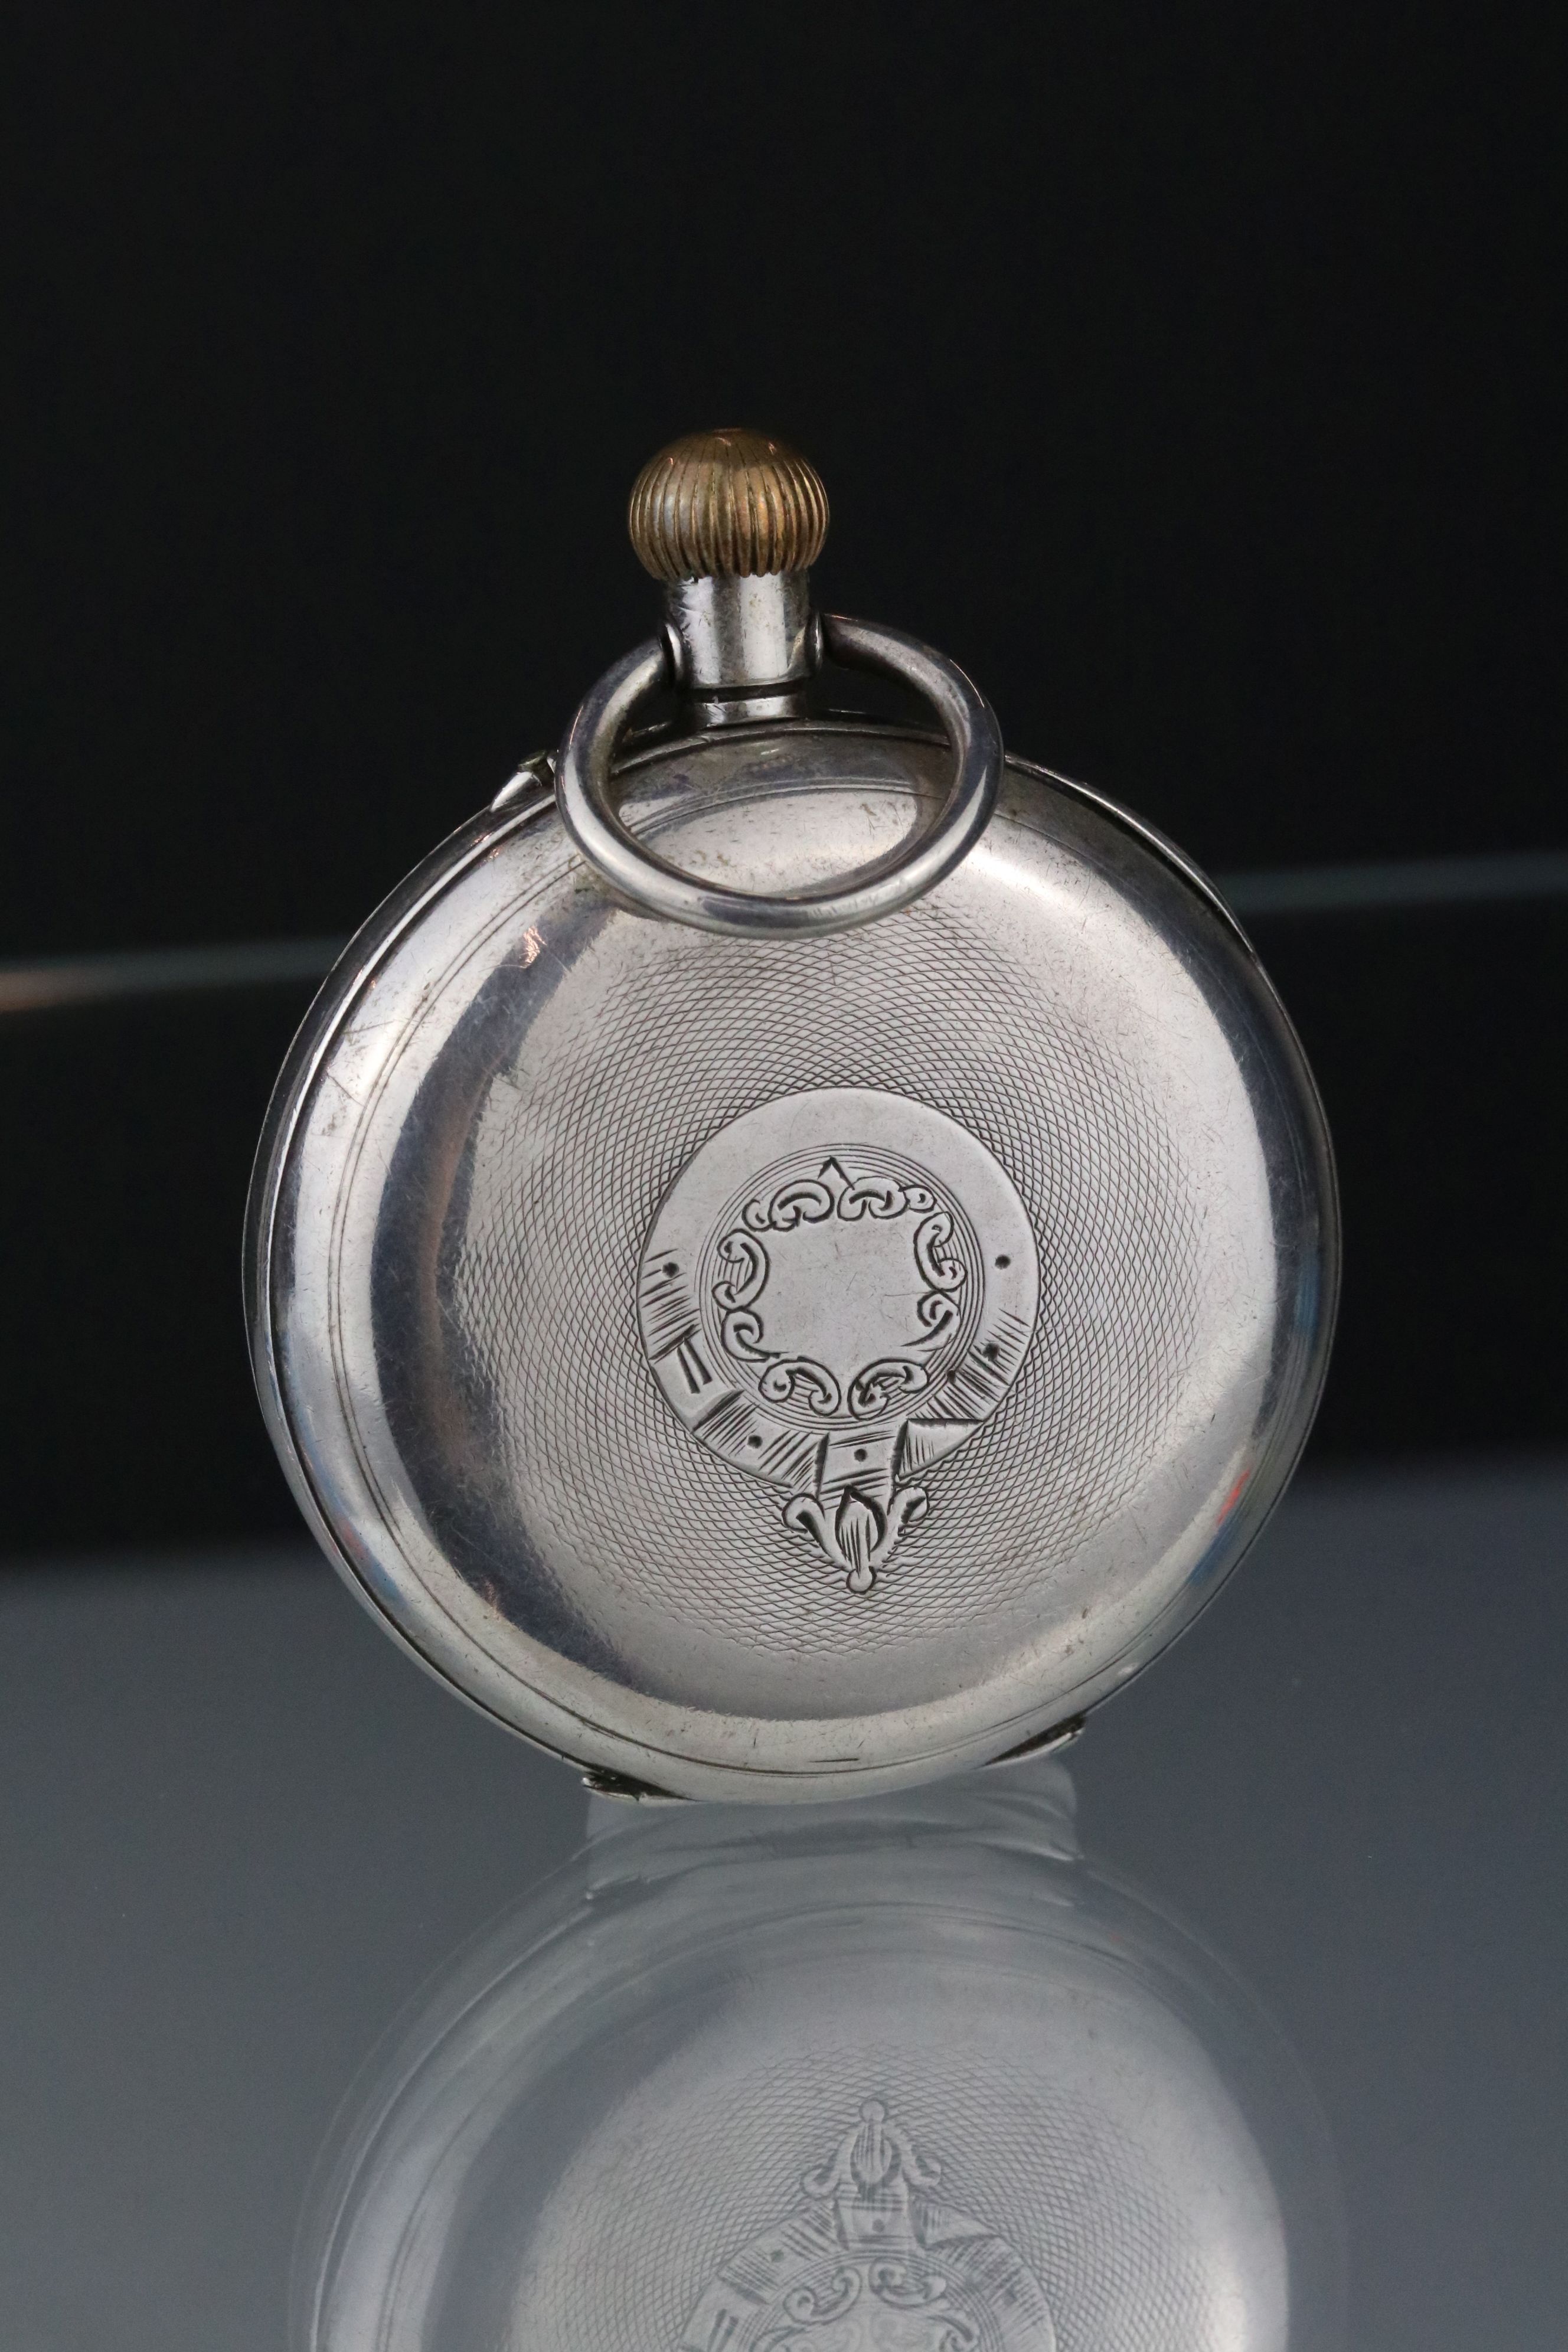 Silver half hunter top wind pocket watch, white enamel dial and seconds dial, black Roman numerals - Image 4 of 6